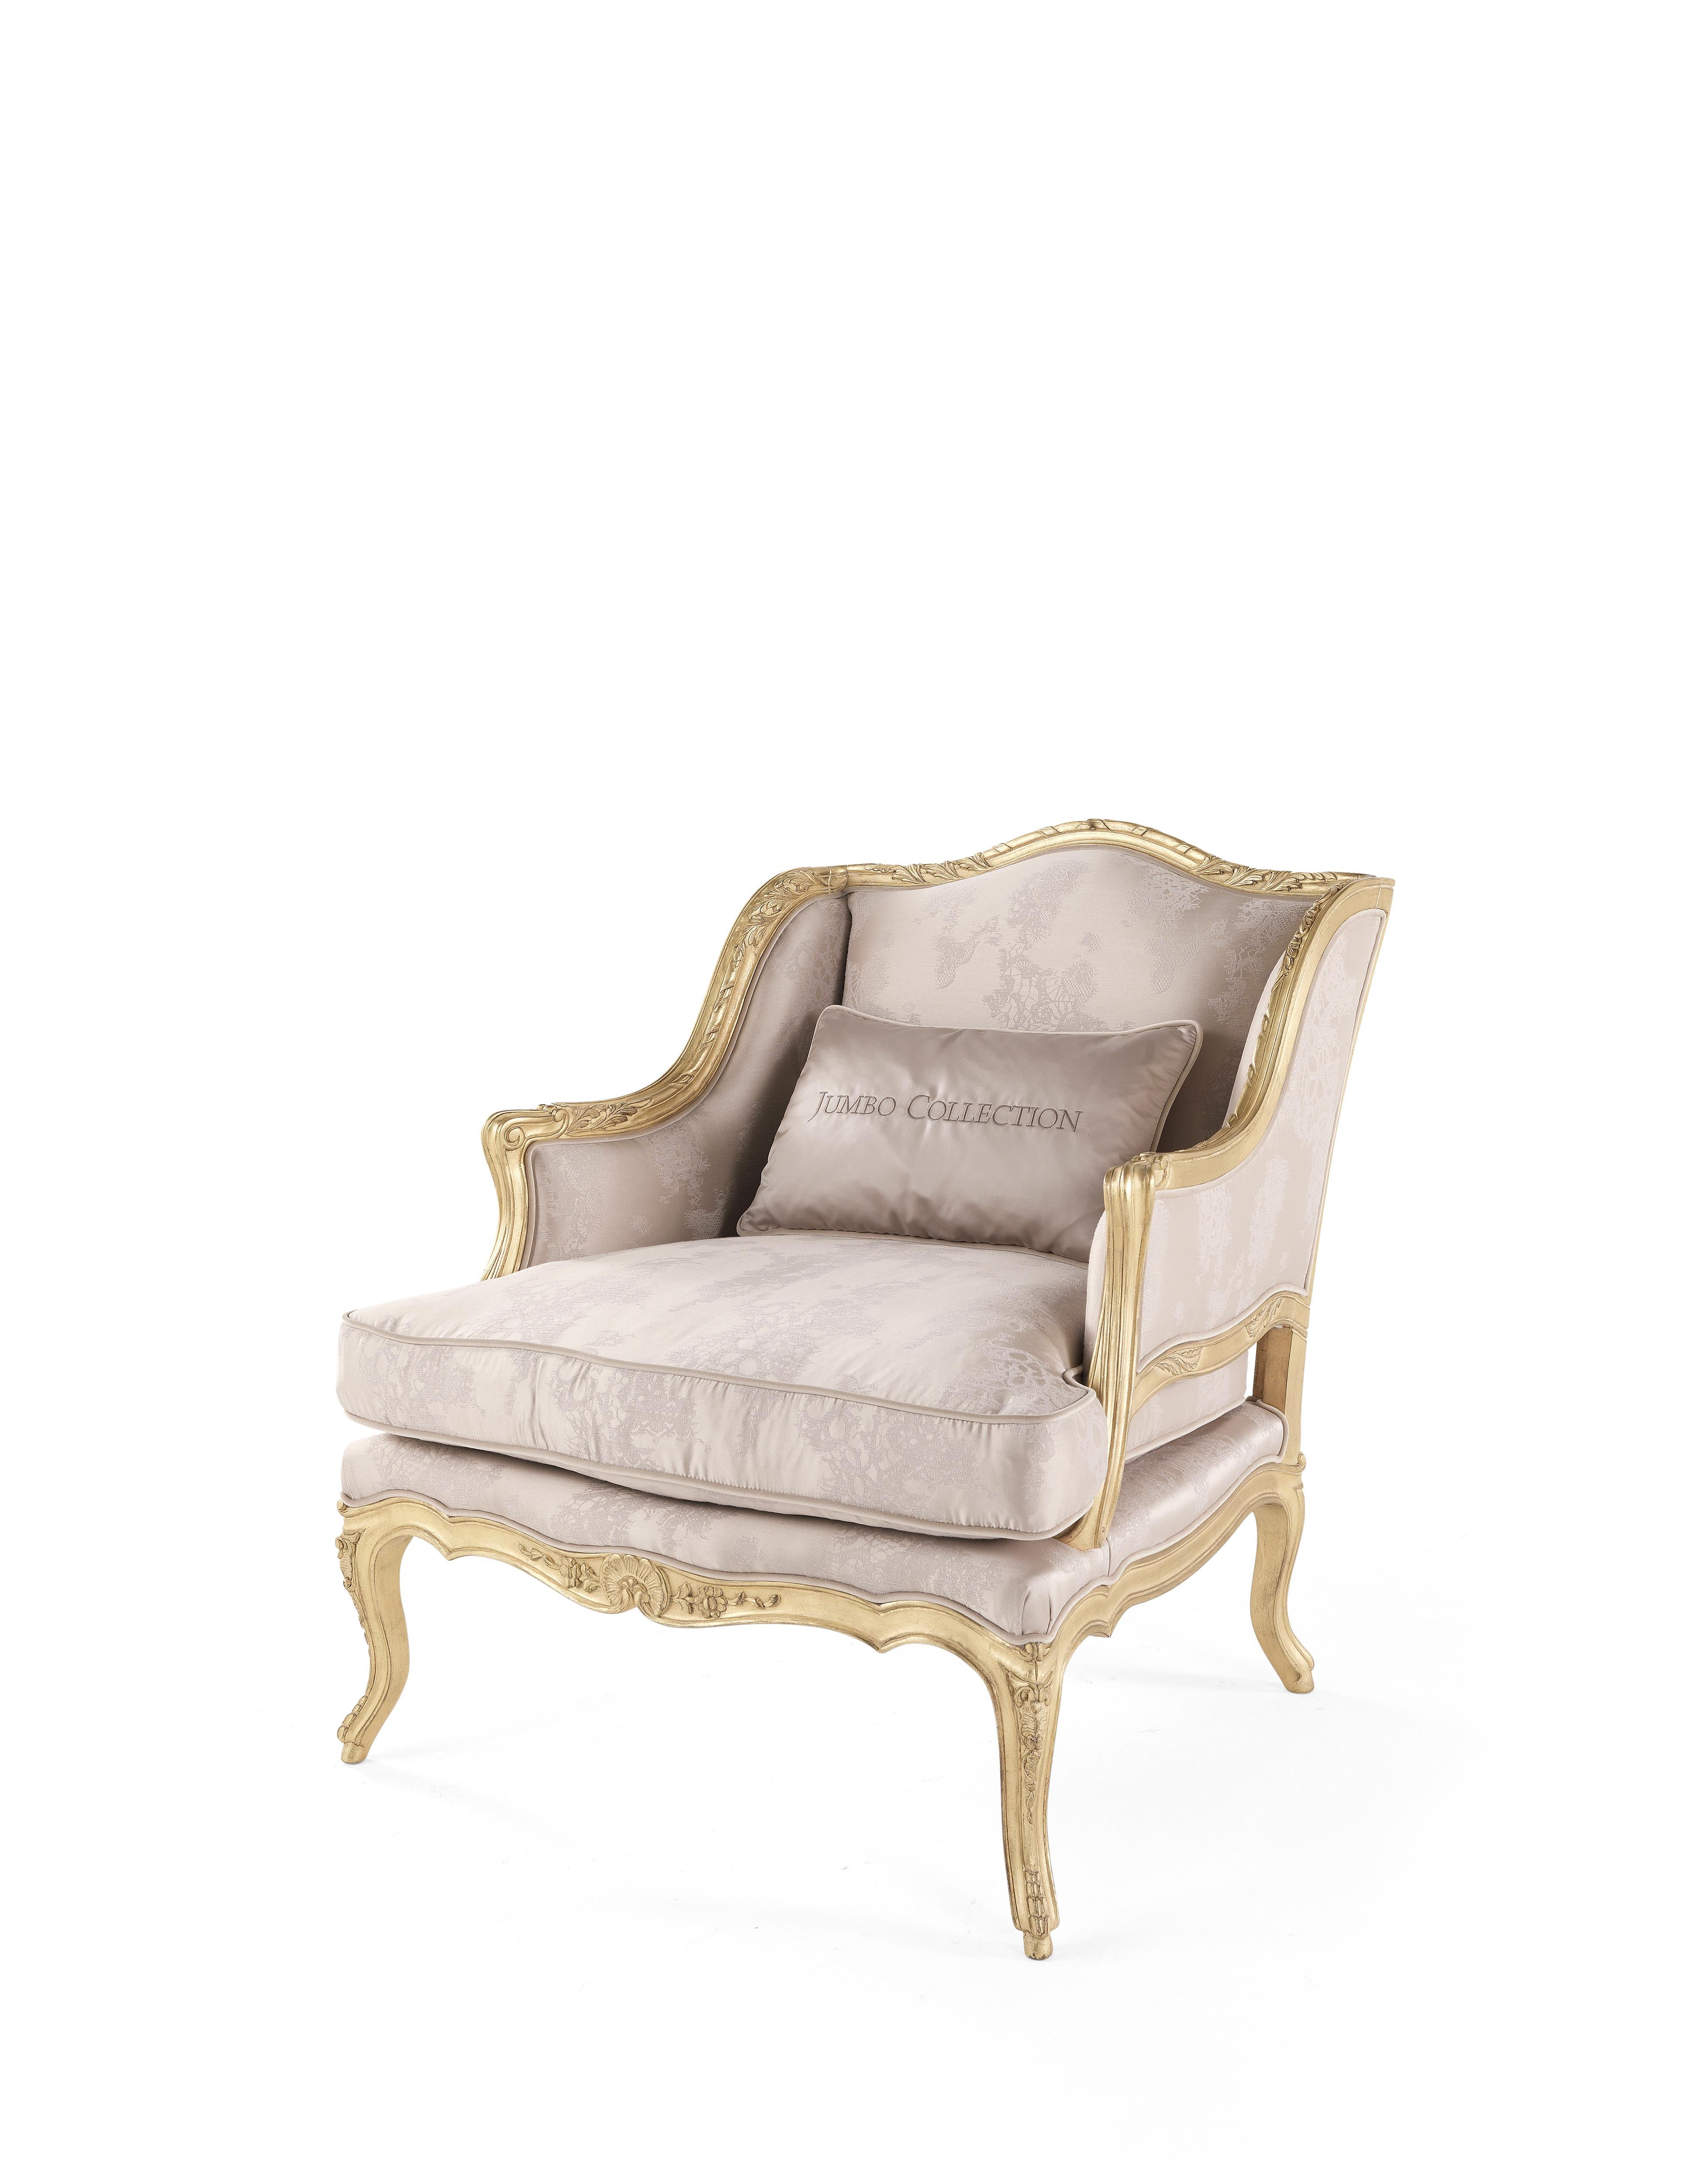 Seductive lines and precious details for the Eglantine collection. Its soft and welcoming shapes are embellished by a hand-carved profile with gold leaf finishing. The perfect furniture for a luxurious and elegant setting, with a timeless